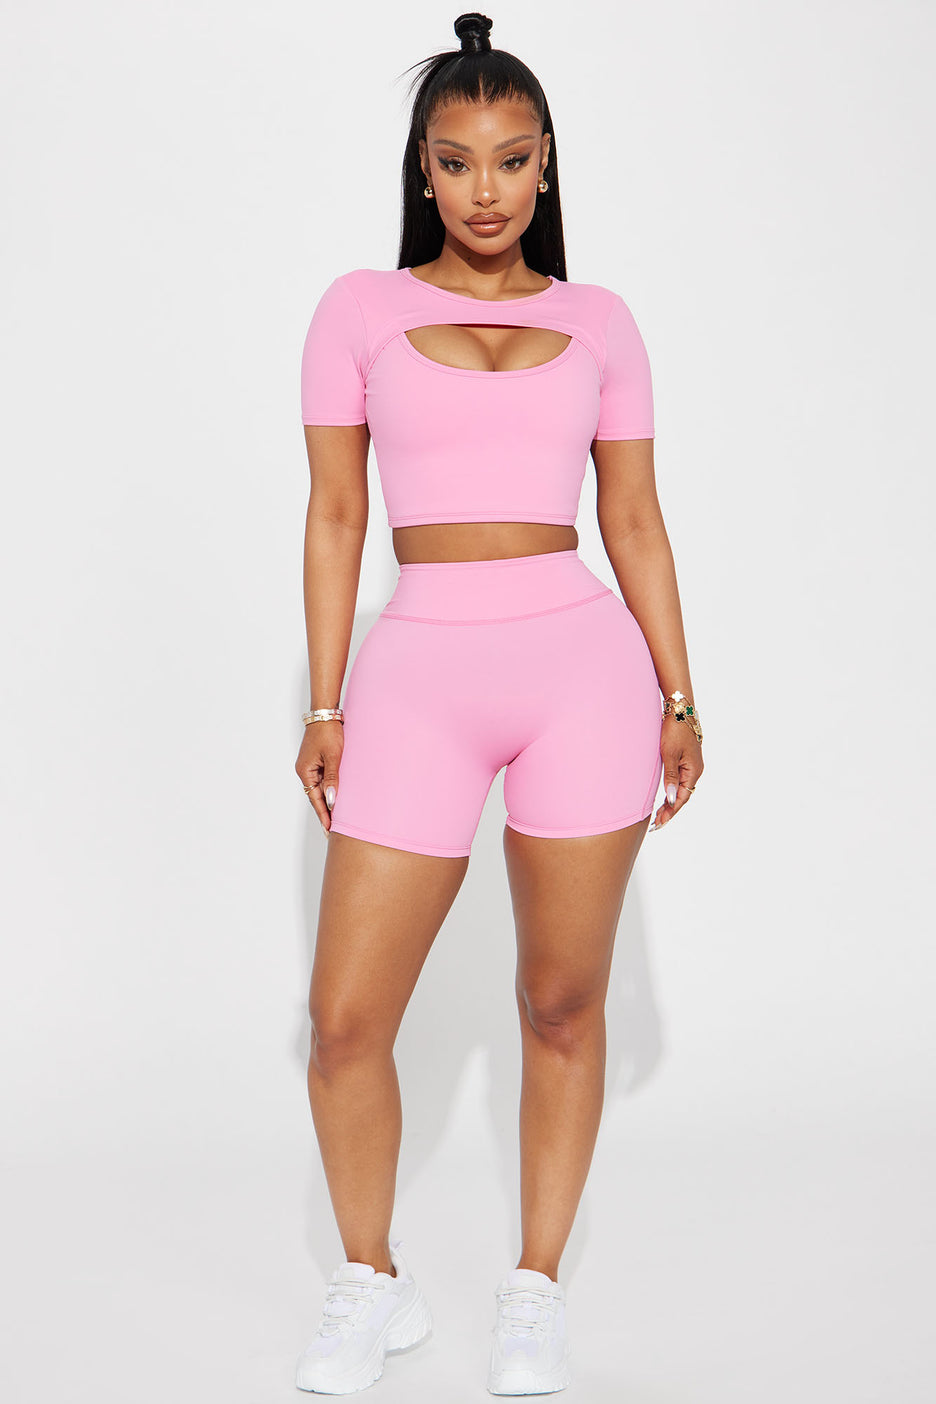 The Top 8 Fashion Nova Athleisure Wear Looks to Invest in This Season 1 4